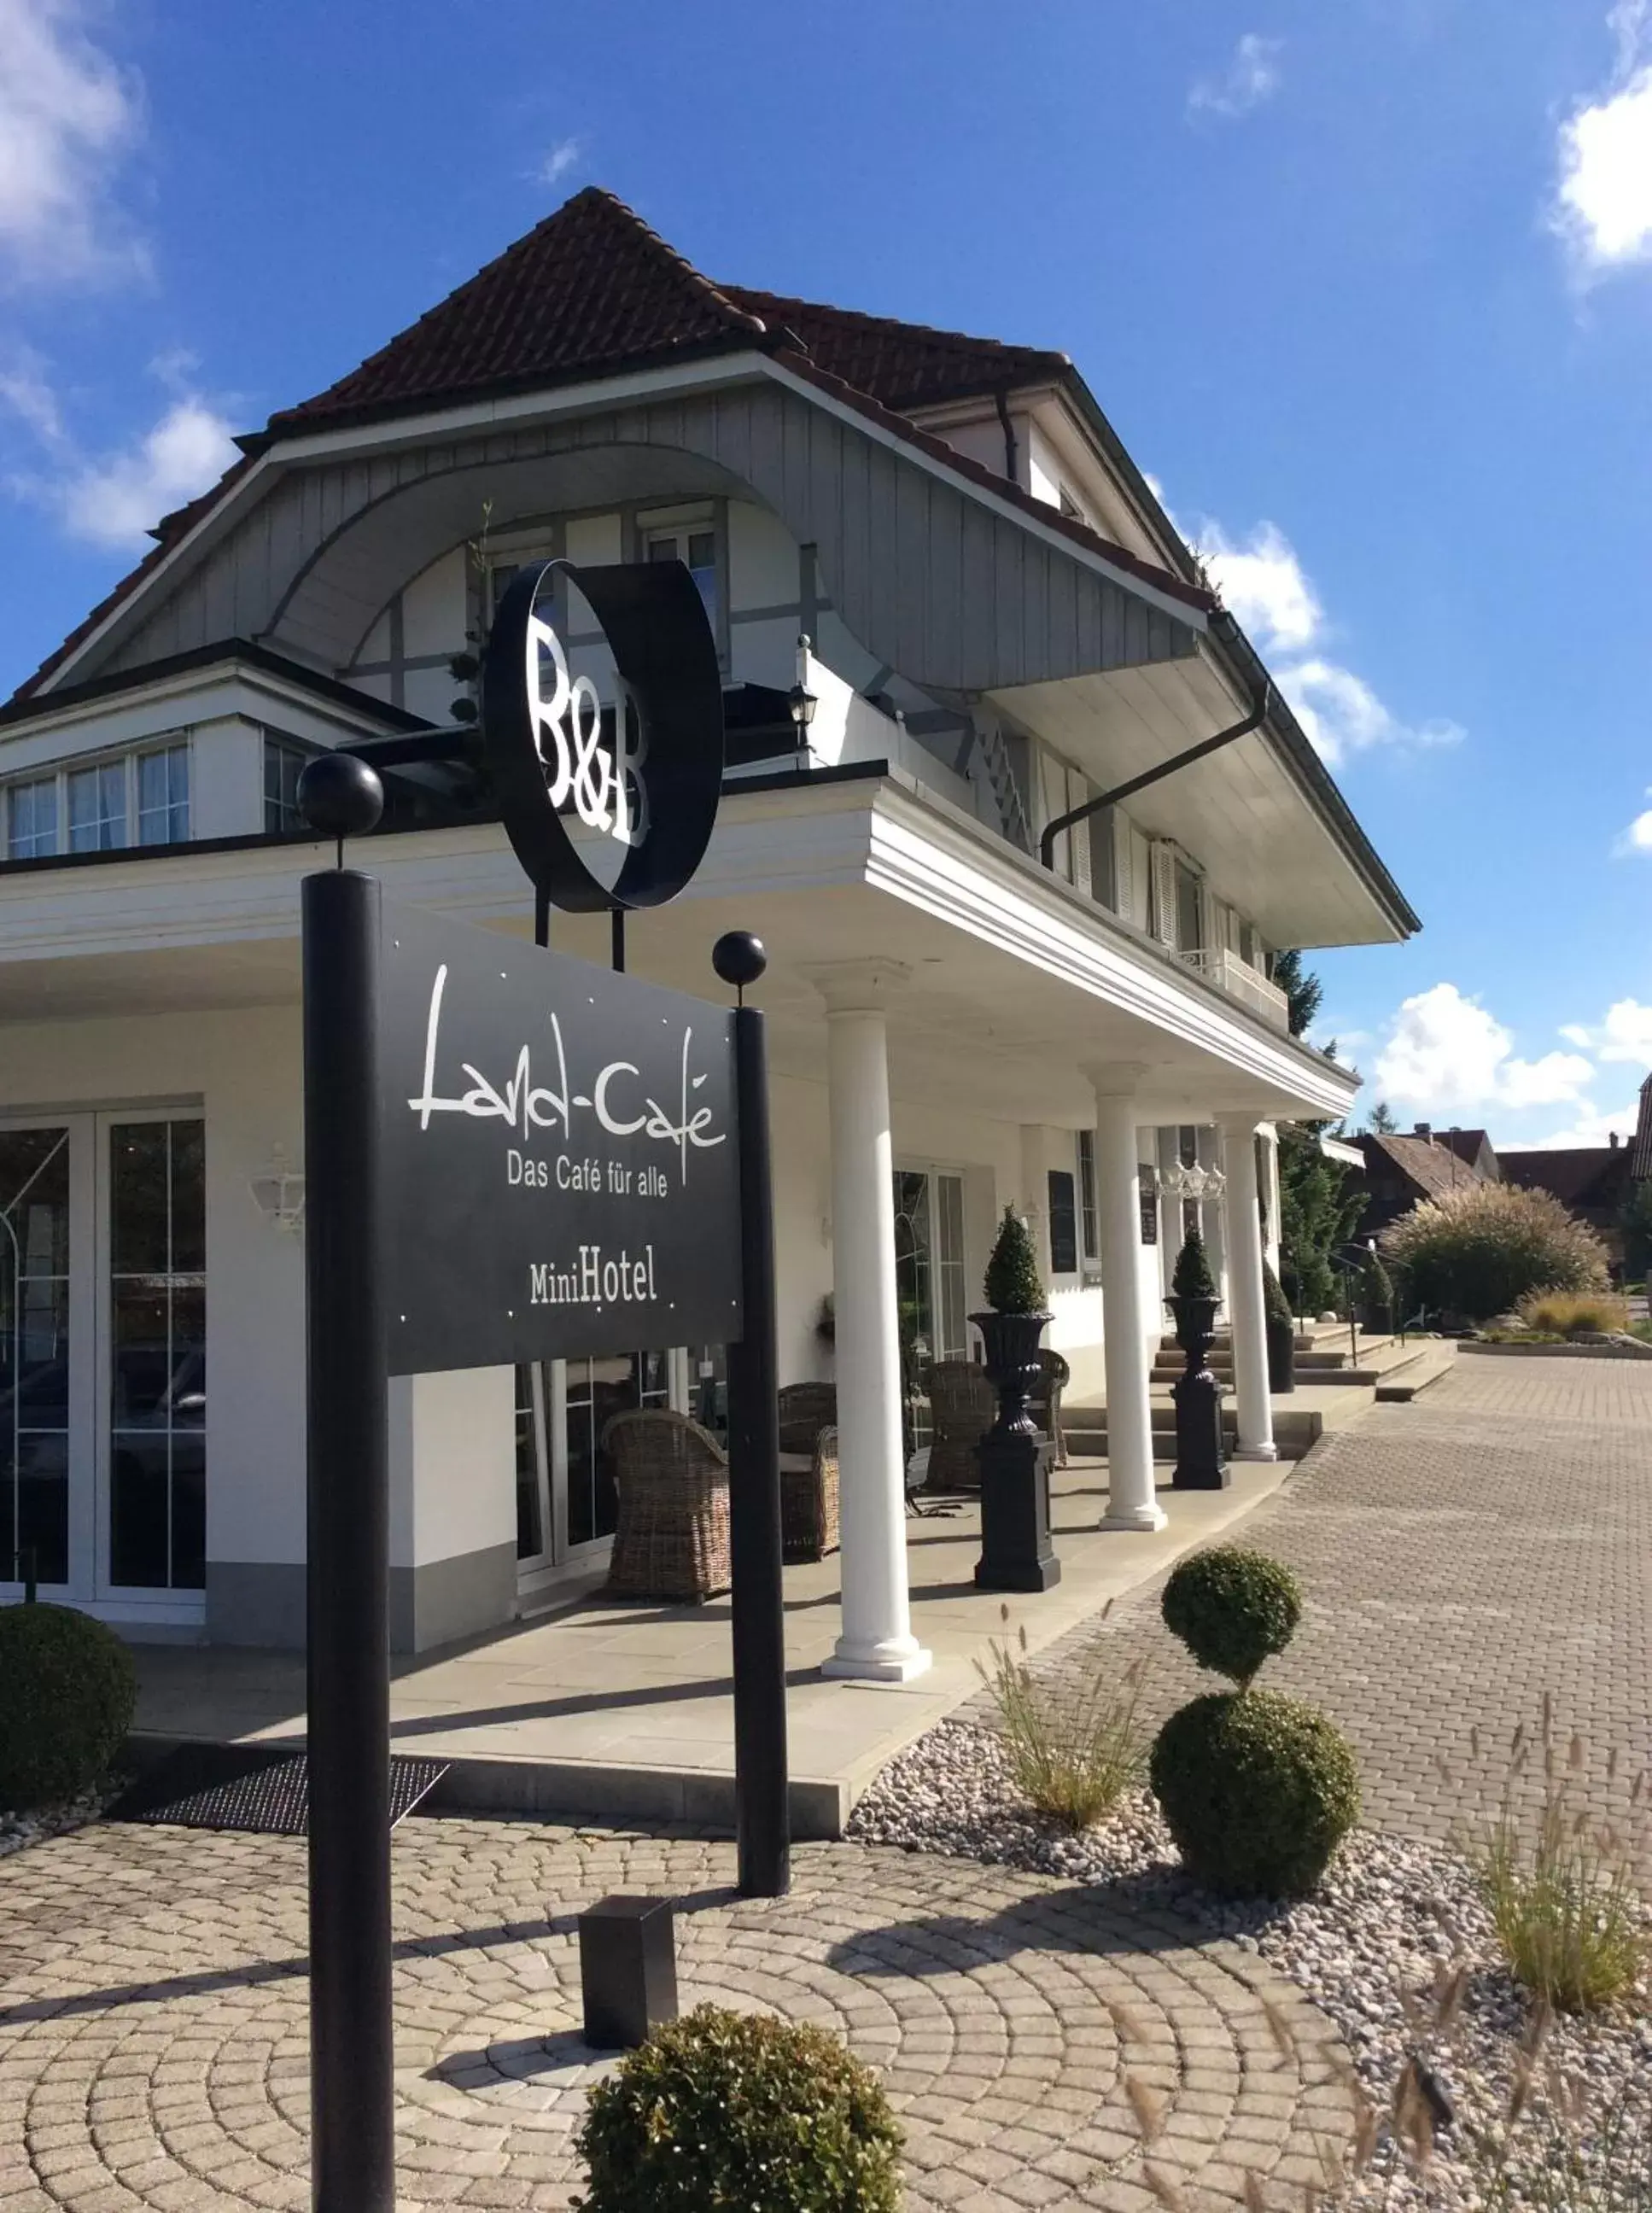 Property Building in Landcafe mit Mini Hotel